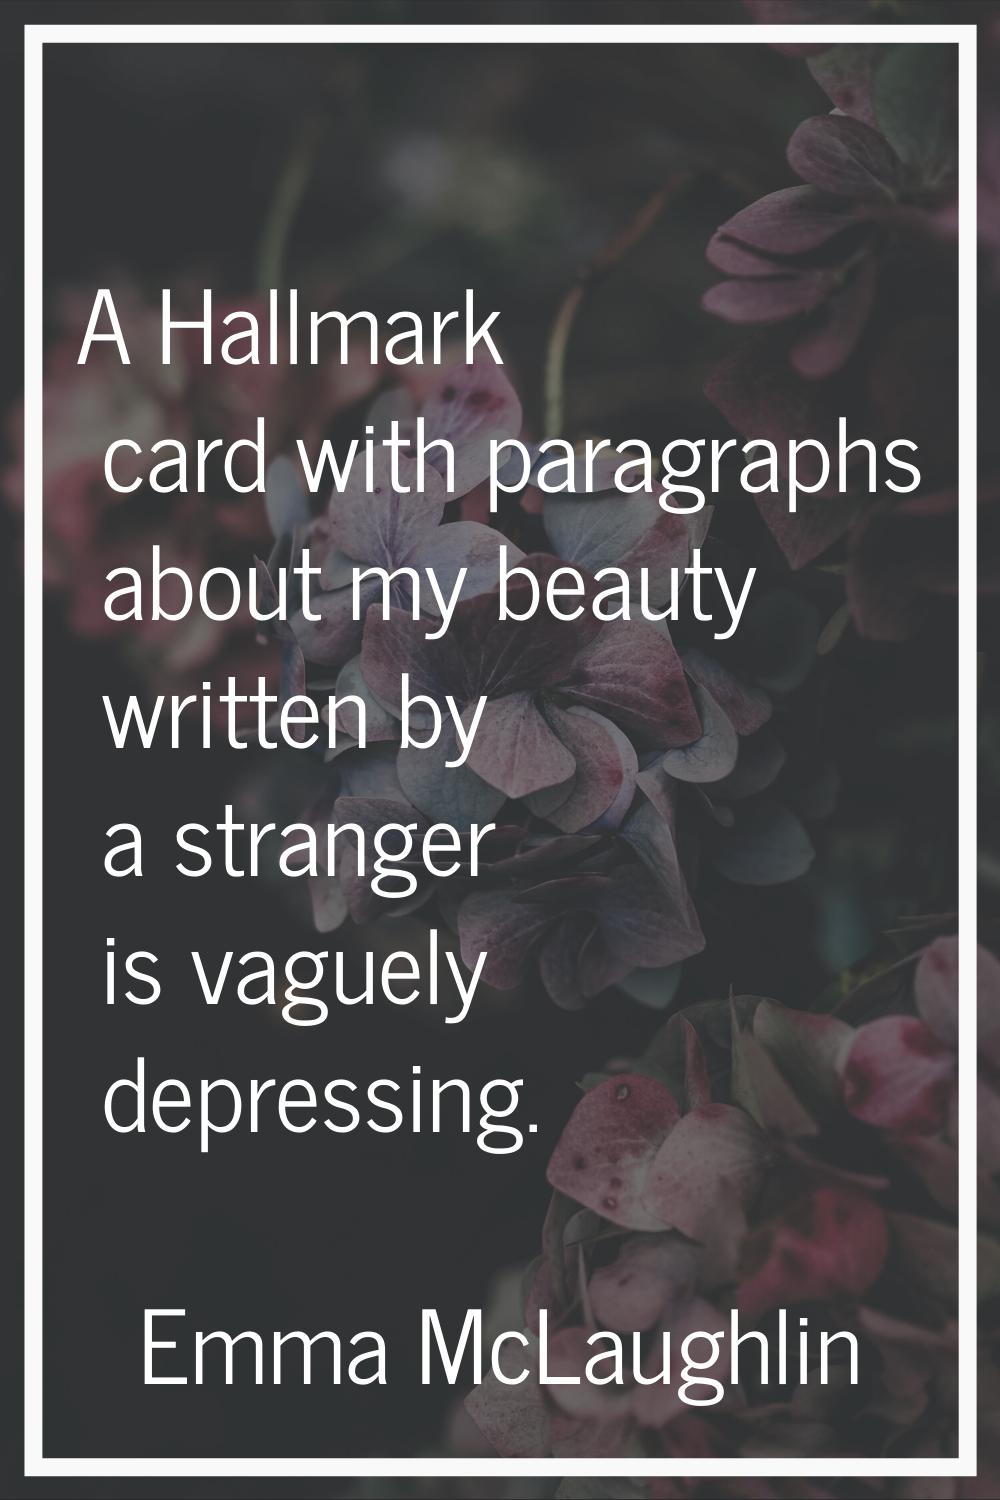 A Hallmark card with paragraphs about my beauty written by a stranger is vaguely depressing.